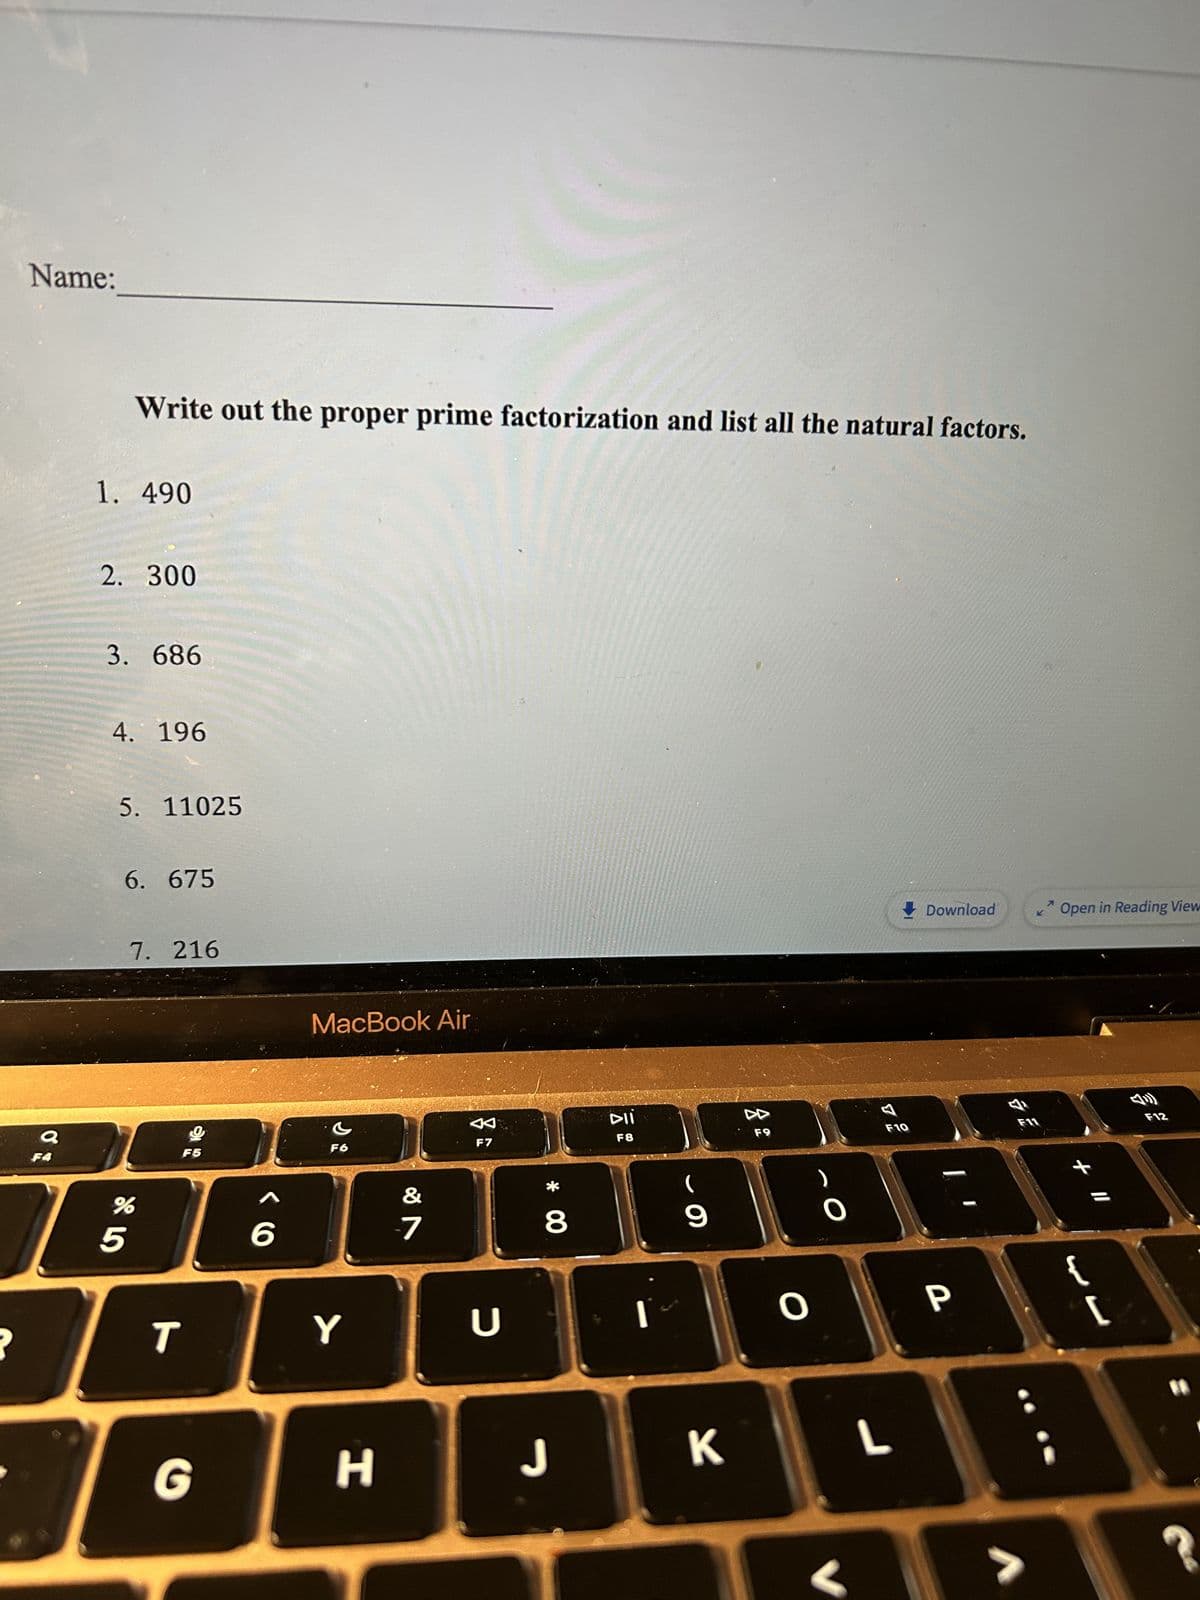 Name:
a
Write out the proper prime factorization and list all the natural factors.
1. 490
2. 300
3. 686
4. 196
5. 11025
6. 675
7. 216
5
%
F5
BAE
6
T
MacBook Air
G
G
F
Y
H
&
-7
K
F7
U
* 00
8
J
DII
F8
Ï
9
K
소요
O
L
Download <Open in Reading View
P
V
+ 11
{
13
[
F12
?